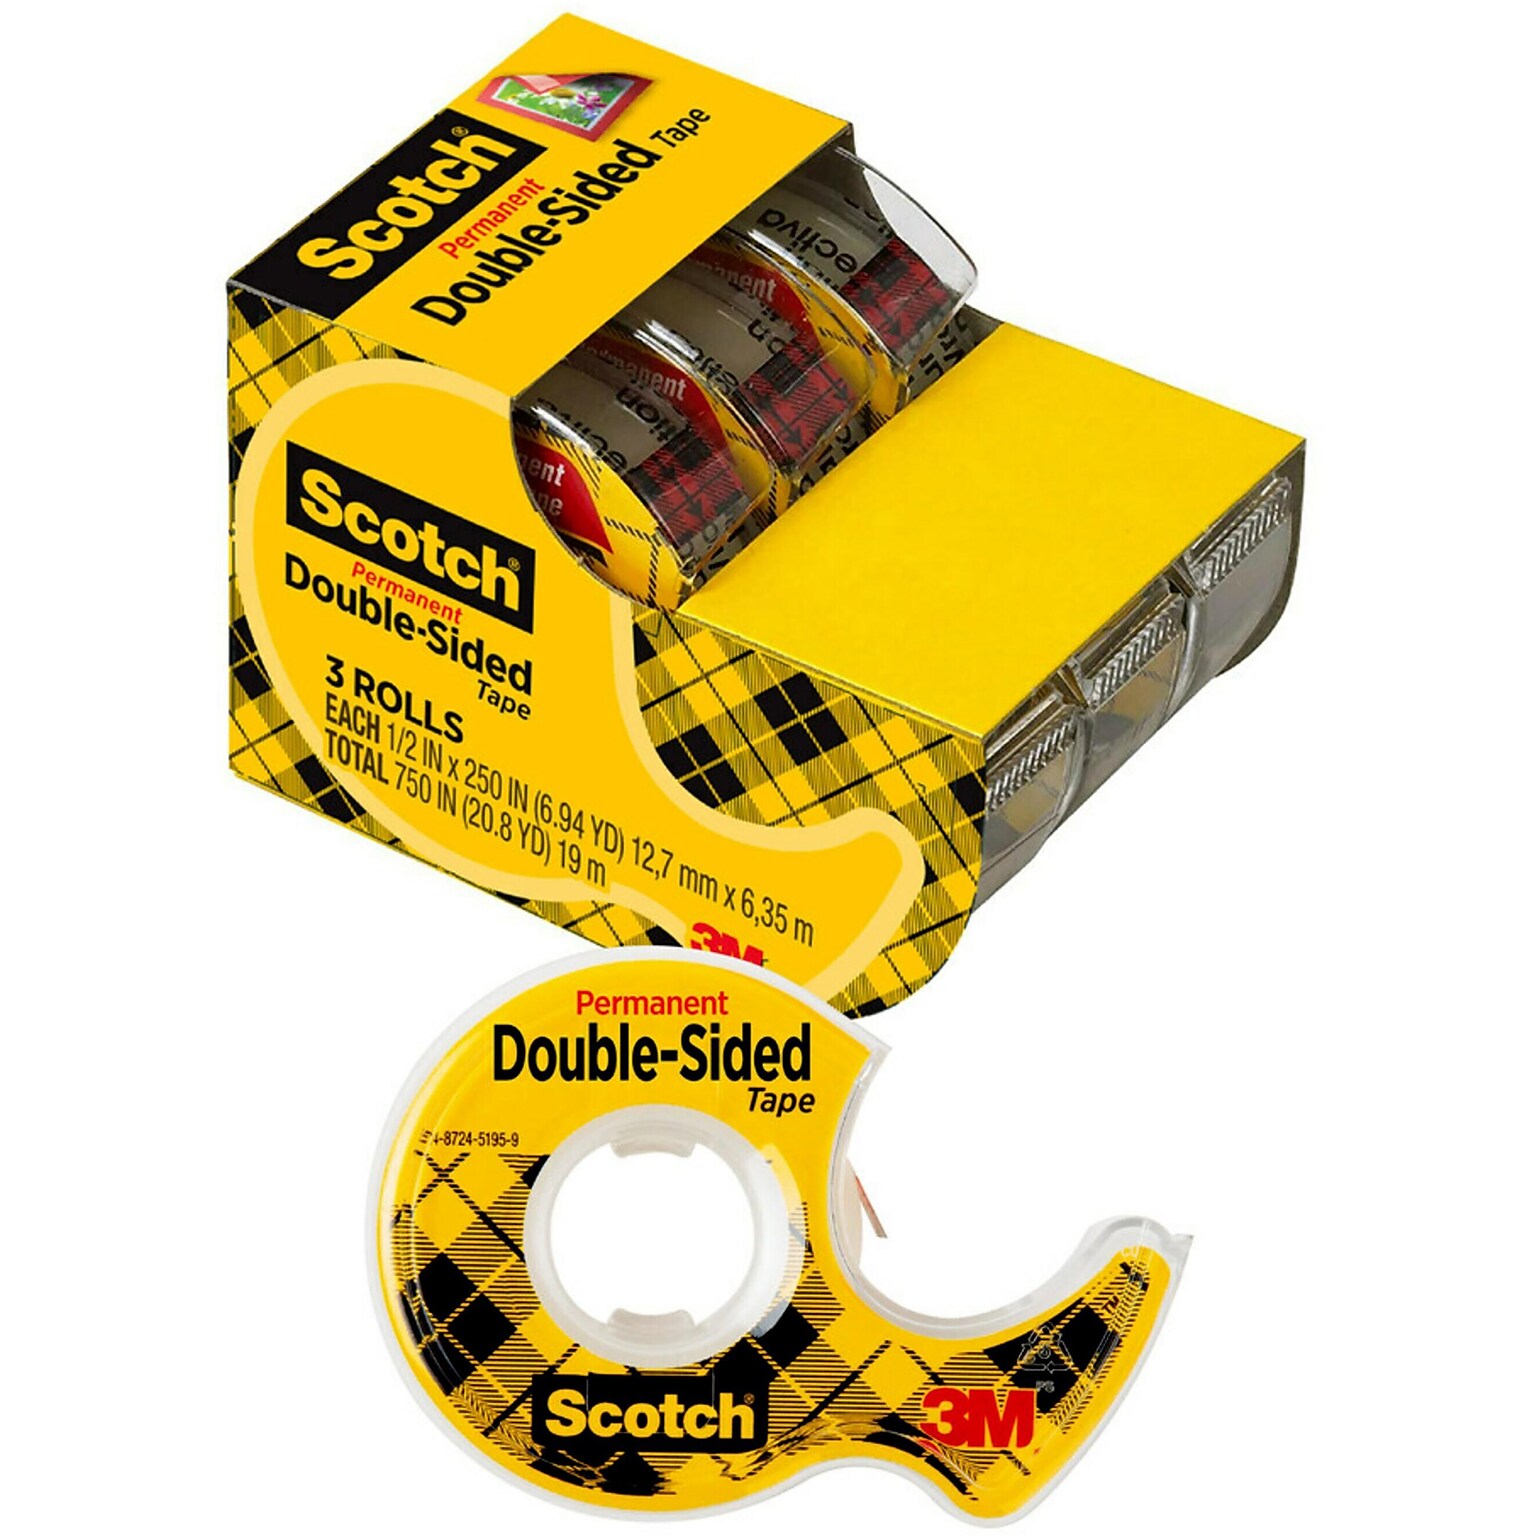 Scotch Permanent Double Sided Tape with Dispenser, 1/2 in x 250 in, 3 Tape Rolls, Home Office and Back to School Supplies